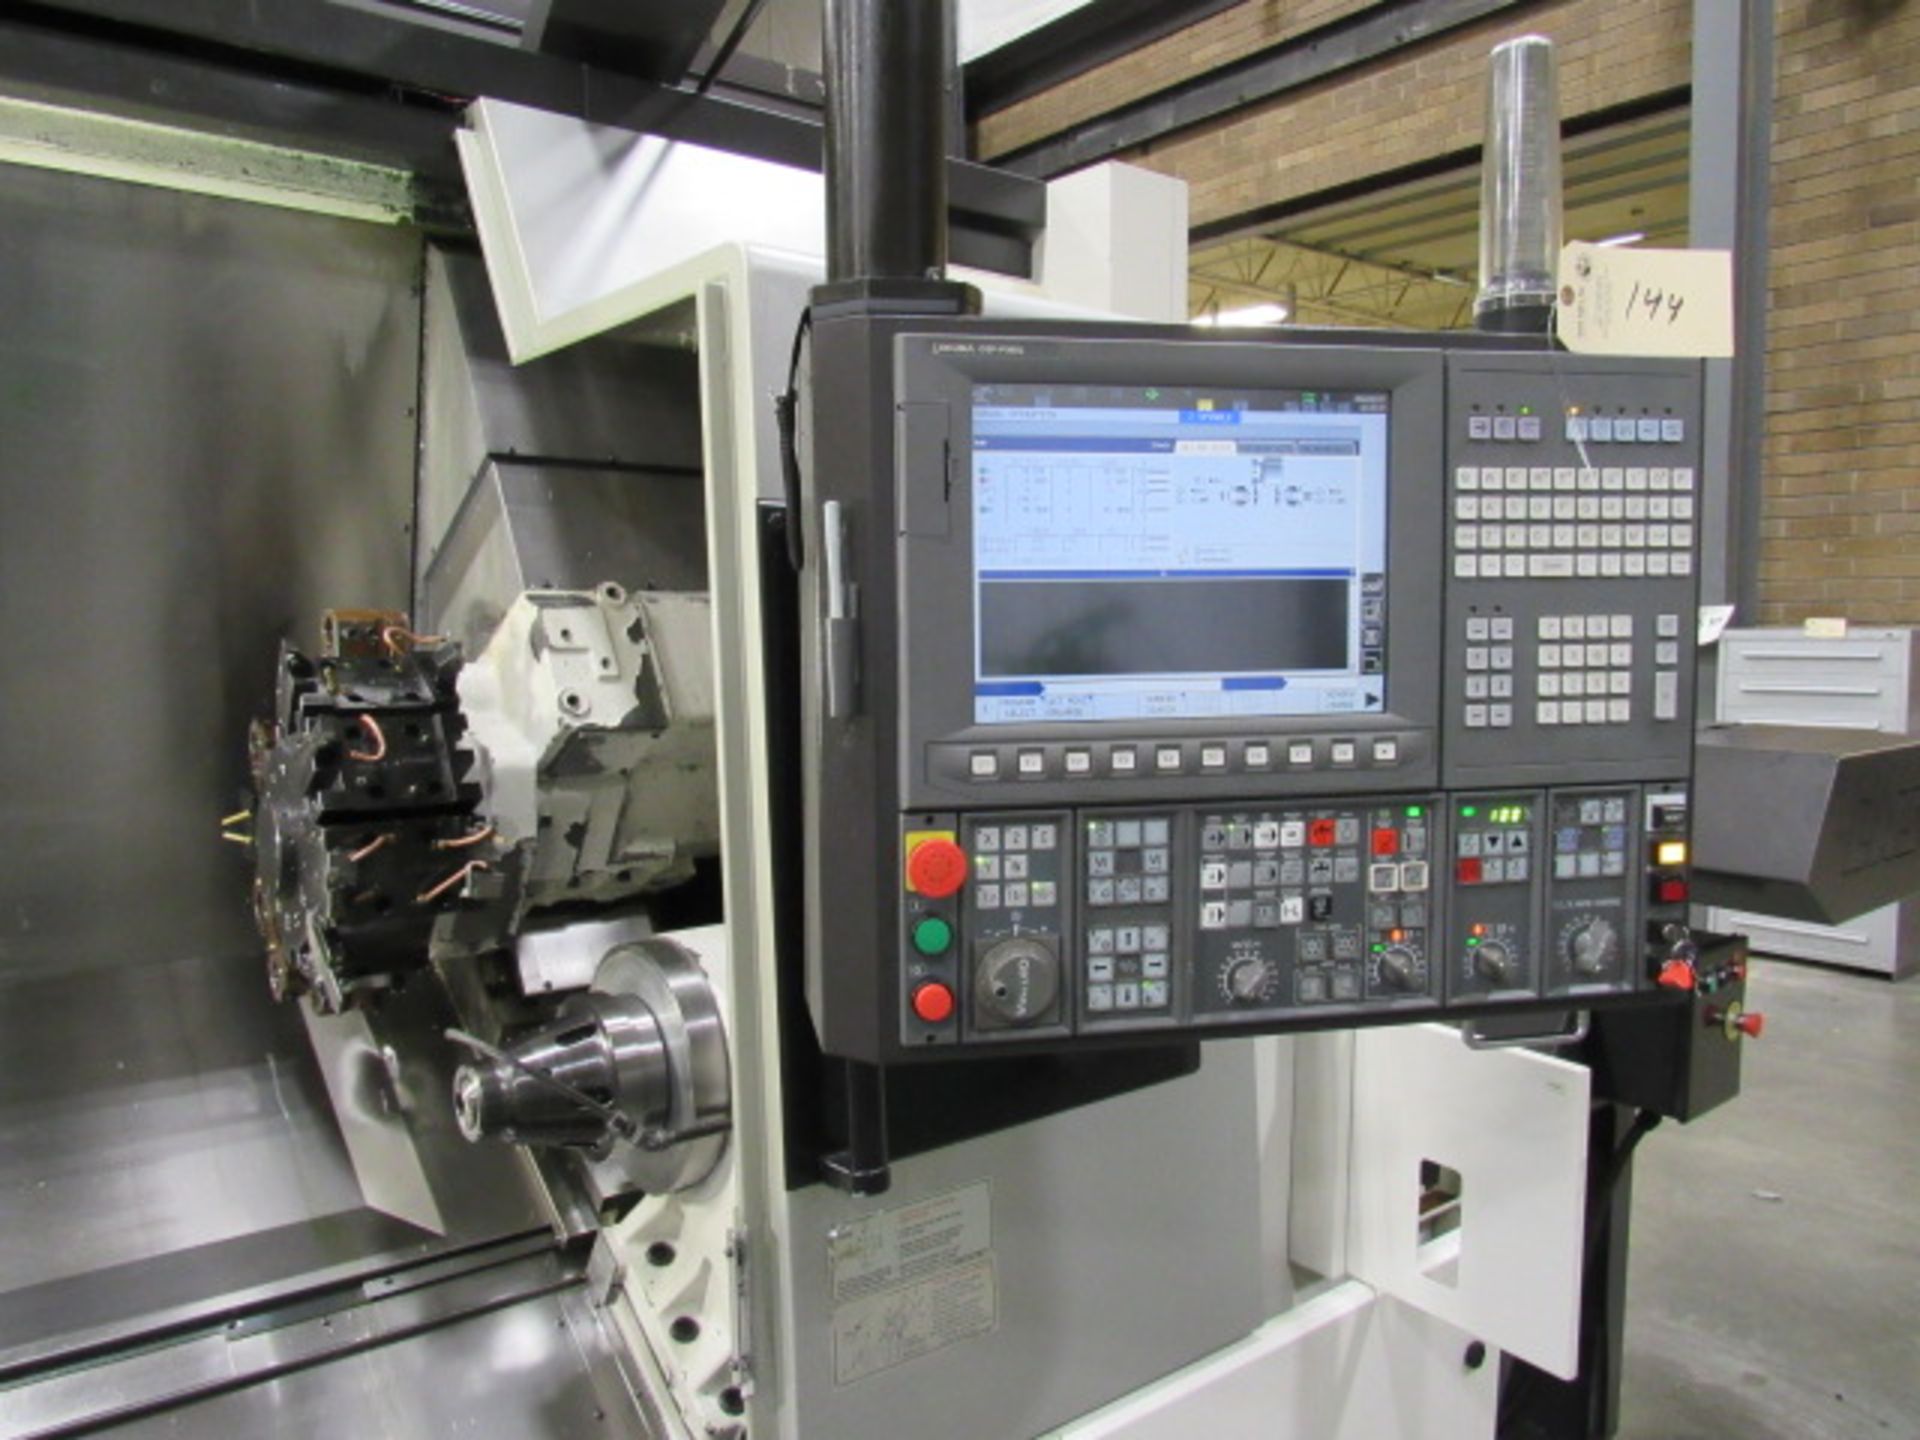 Okuma LB-3000EXII Spaceturn 5-Axis Dual Spindle CNC Turning Center - Image 5 of 9